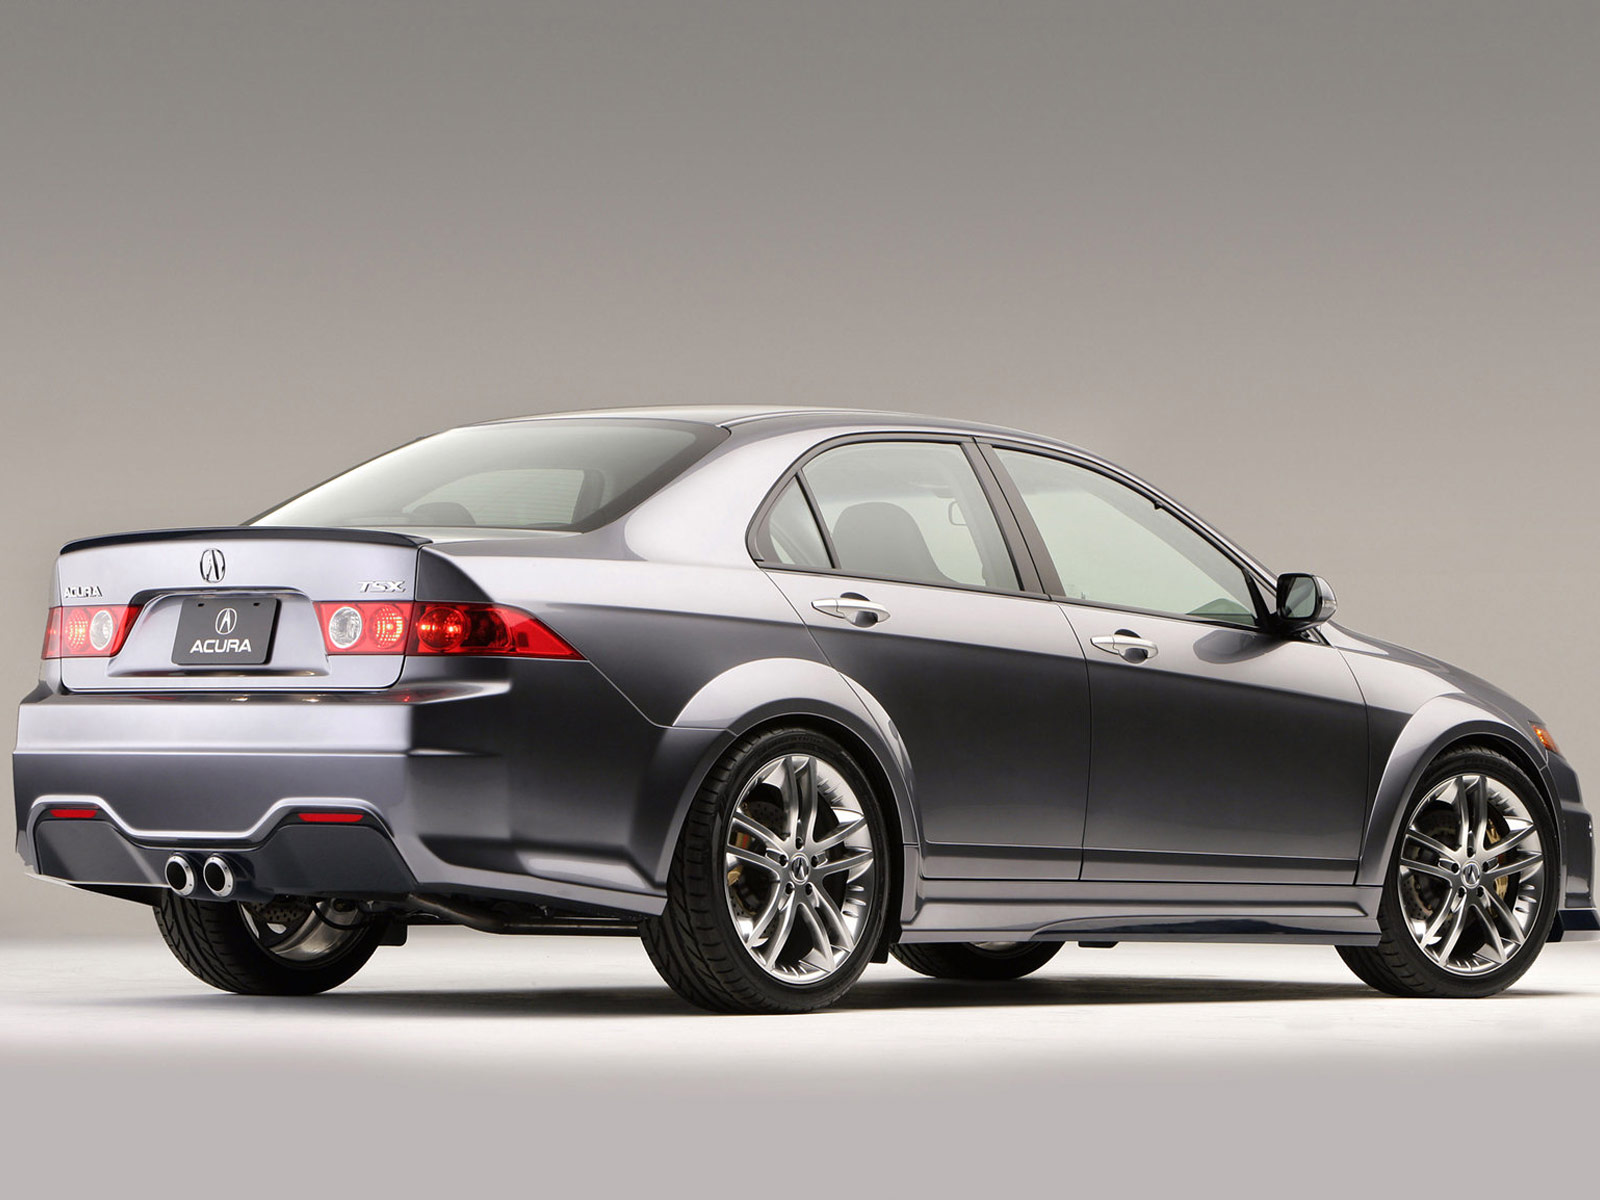 2005 ACURA TSX A Spec Concept Car Pictures Download